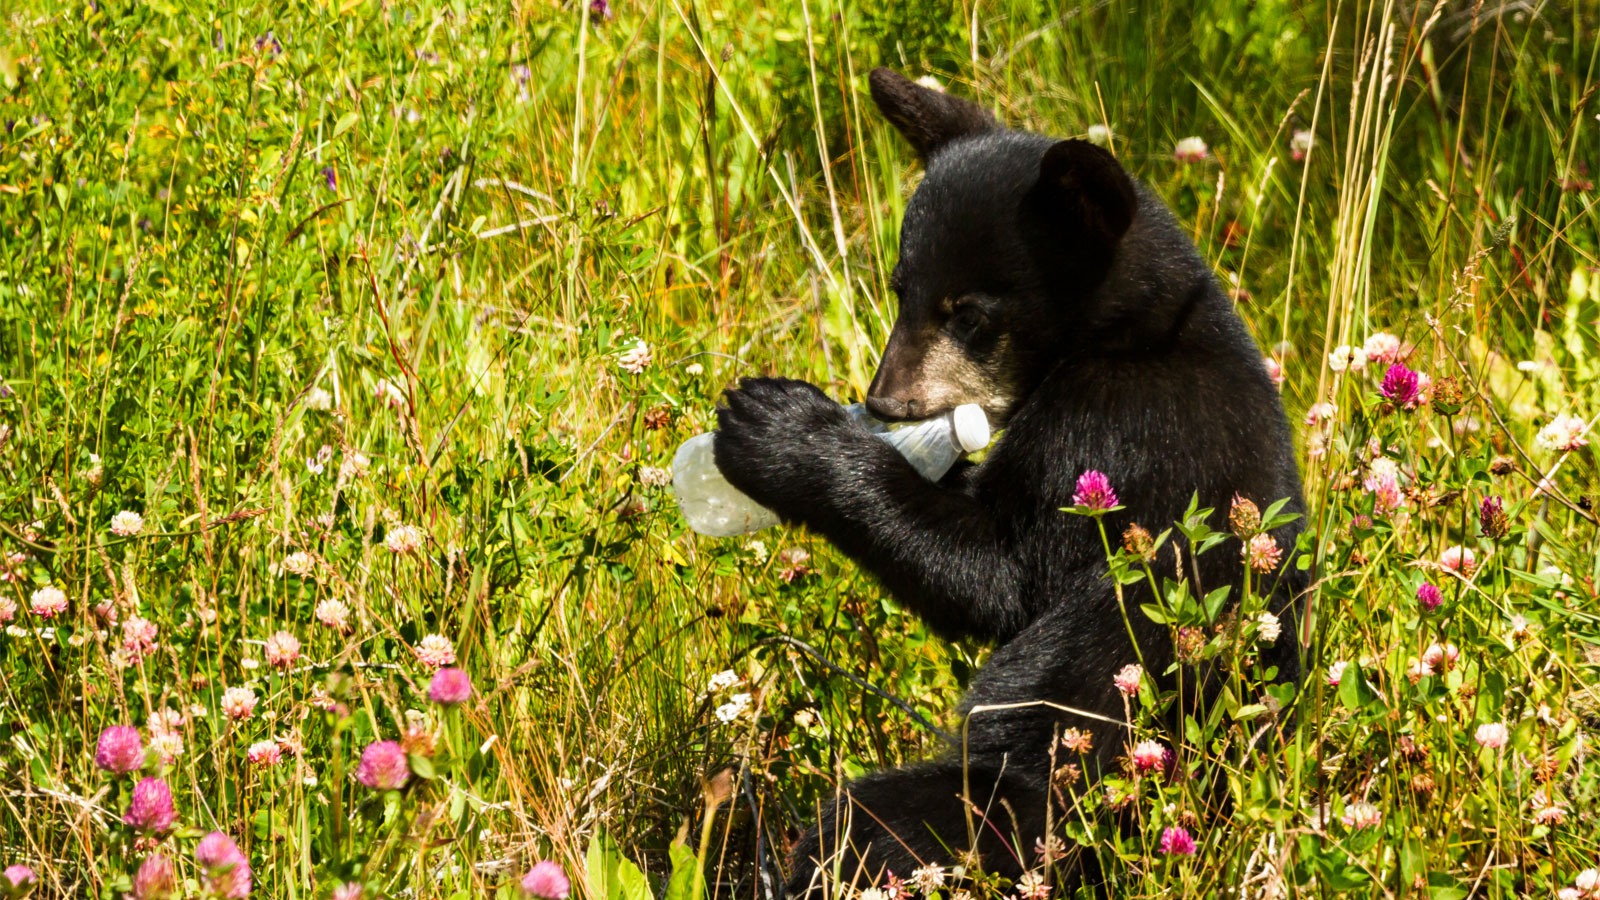 Black bear chewing on discarded water bottle